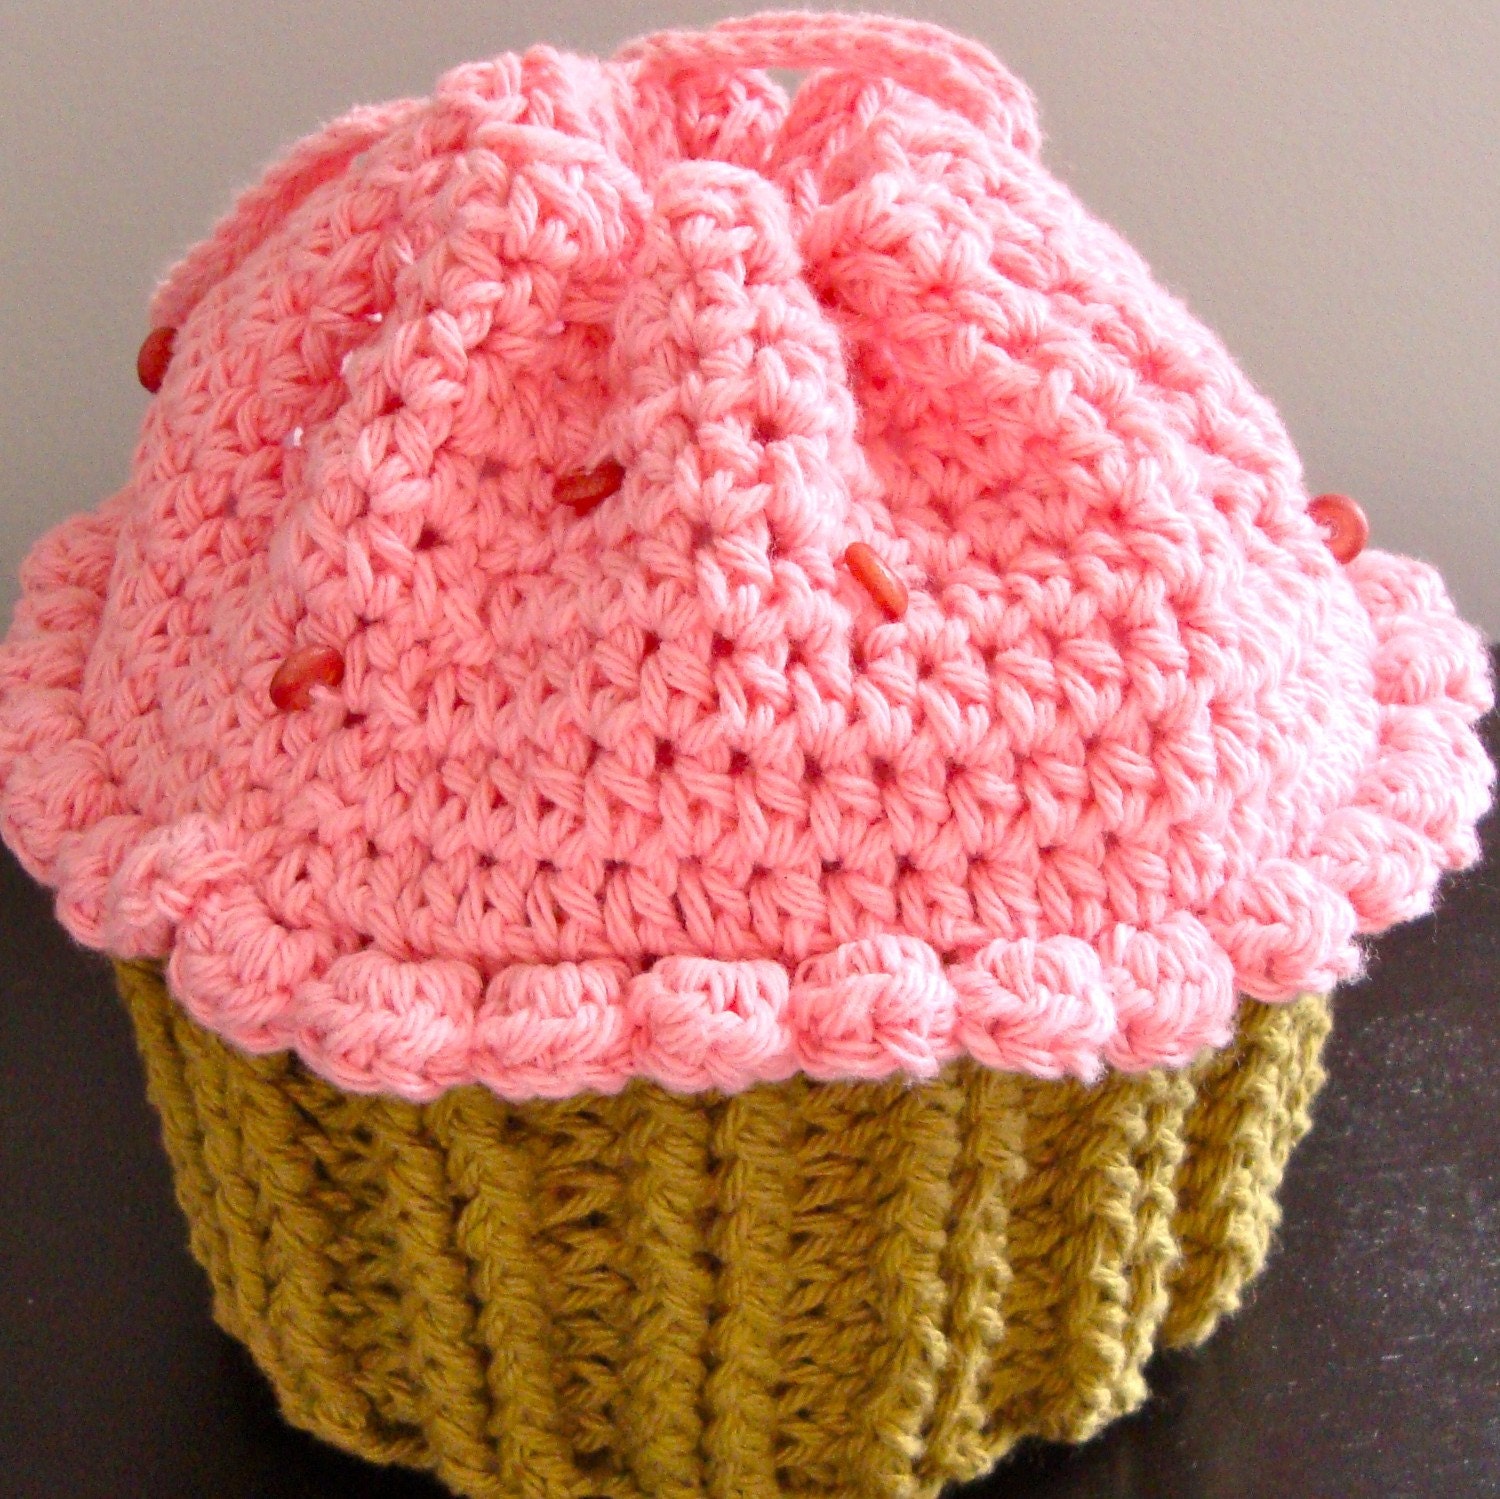 CROCHET CUPCAKE PURSE-No. 32 by DesignsbyLilly by DesignsbyLilly